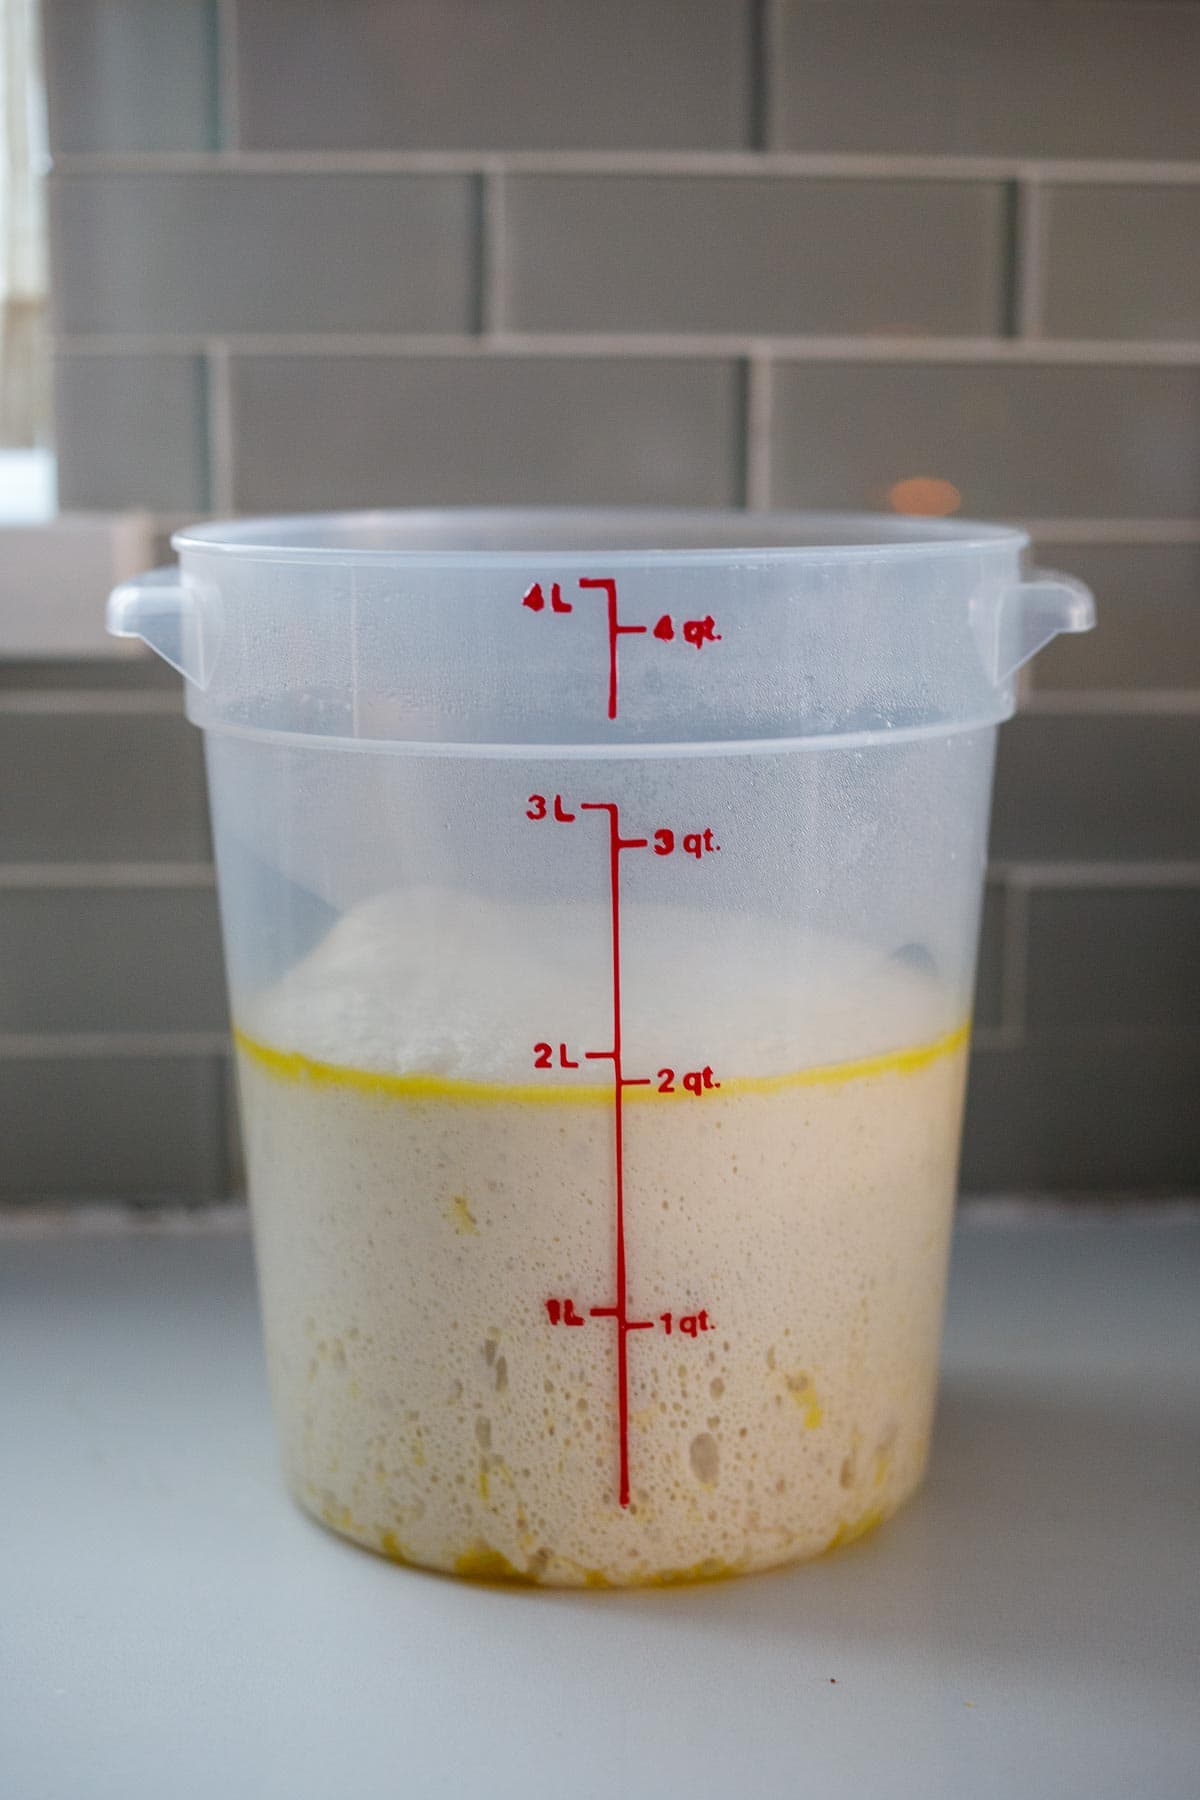 The pizza dough, doubled in size in same consenter. 